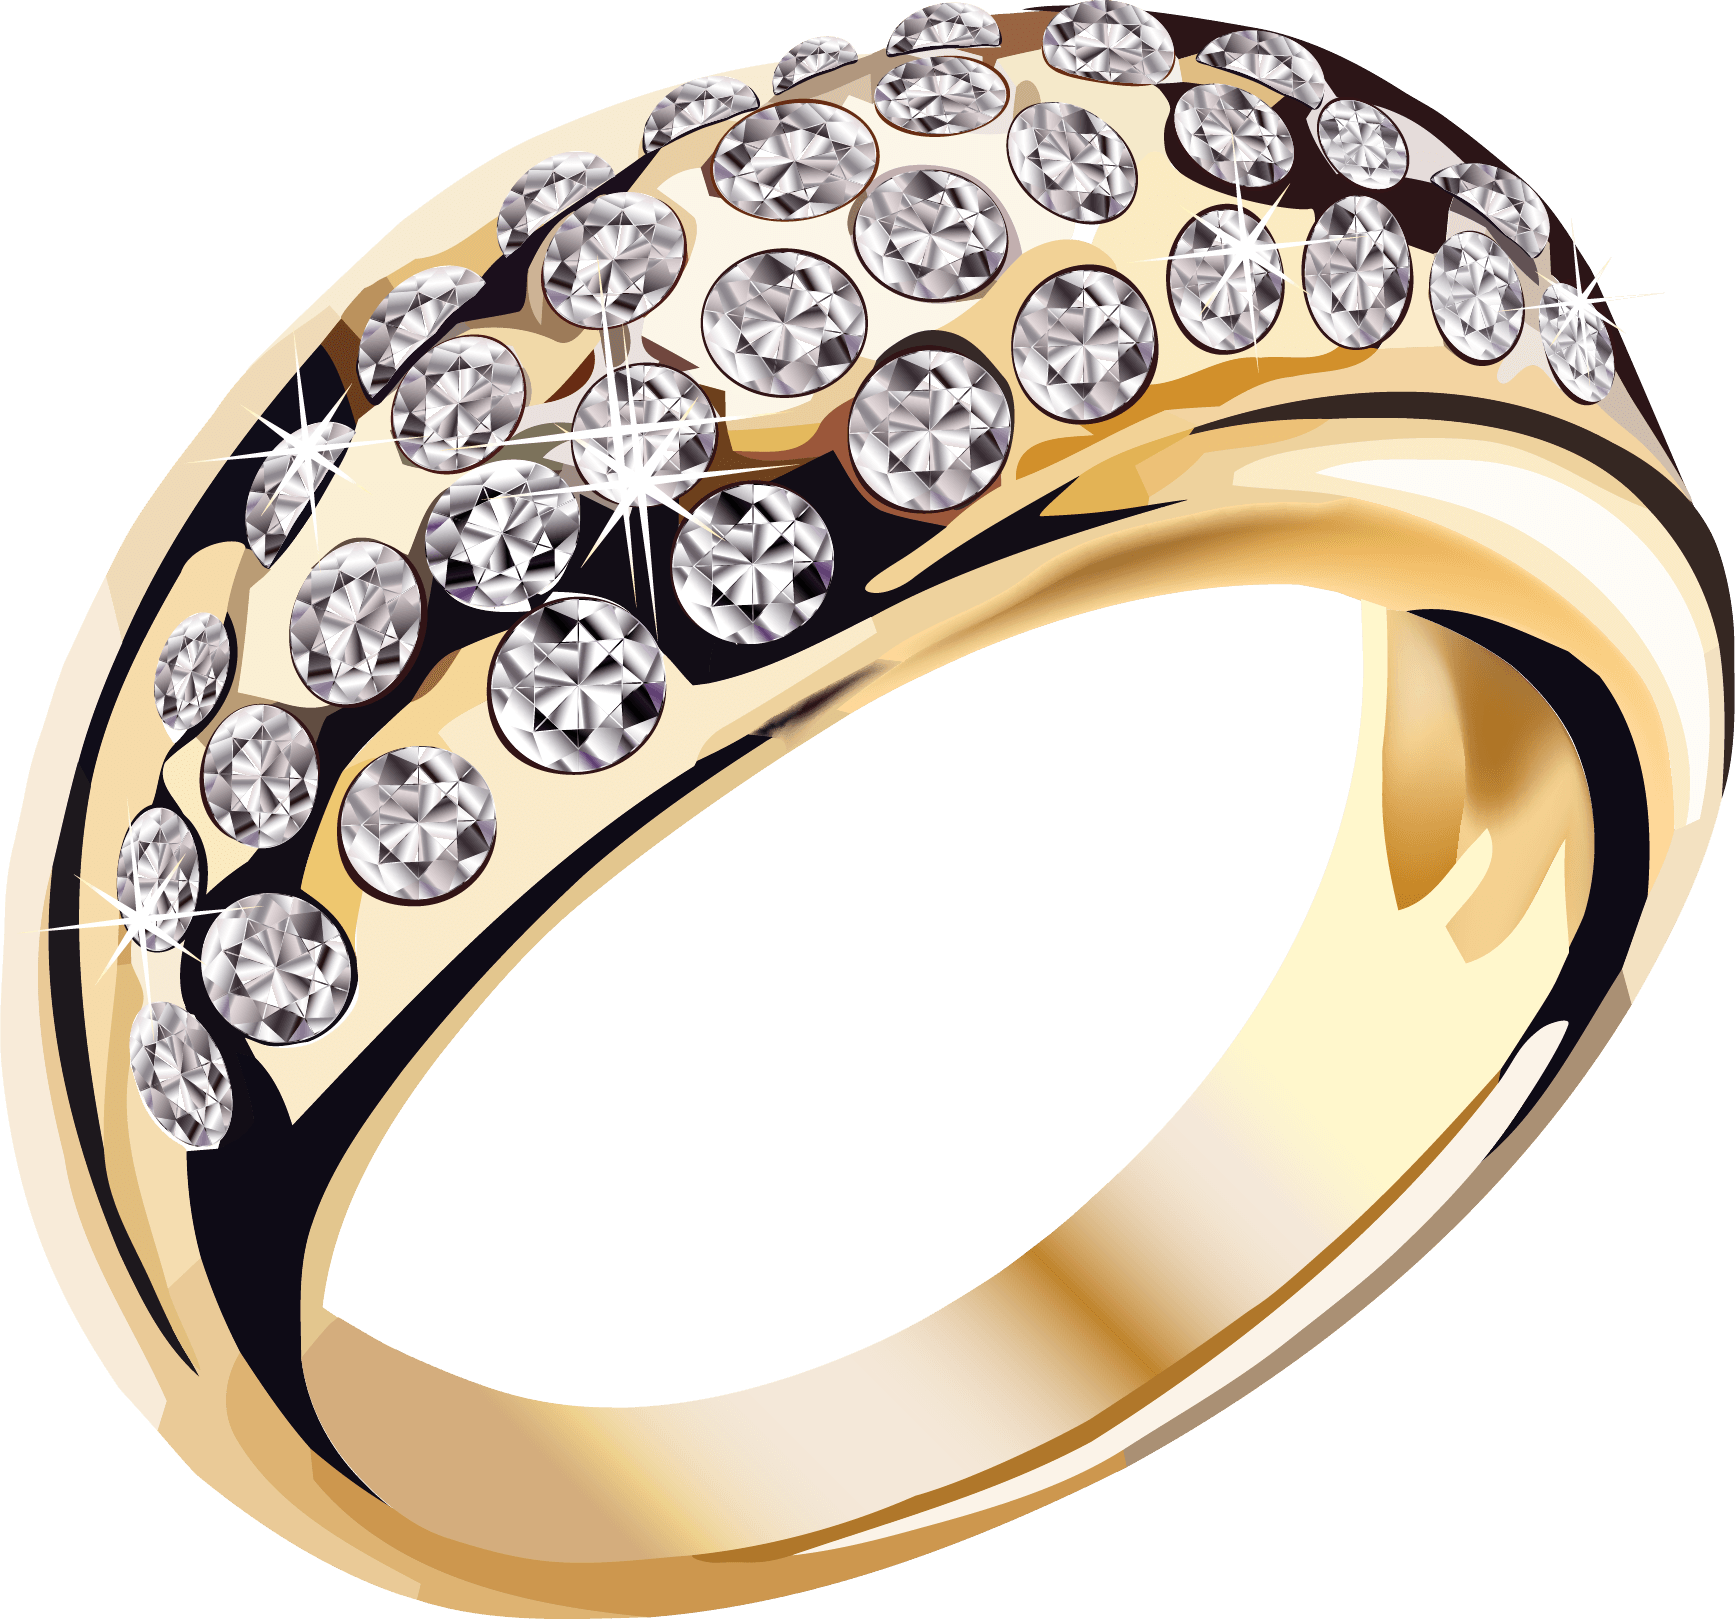 Engagement clipart bling ring. Gold diamonds jewelry transparent